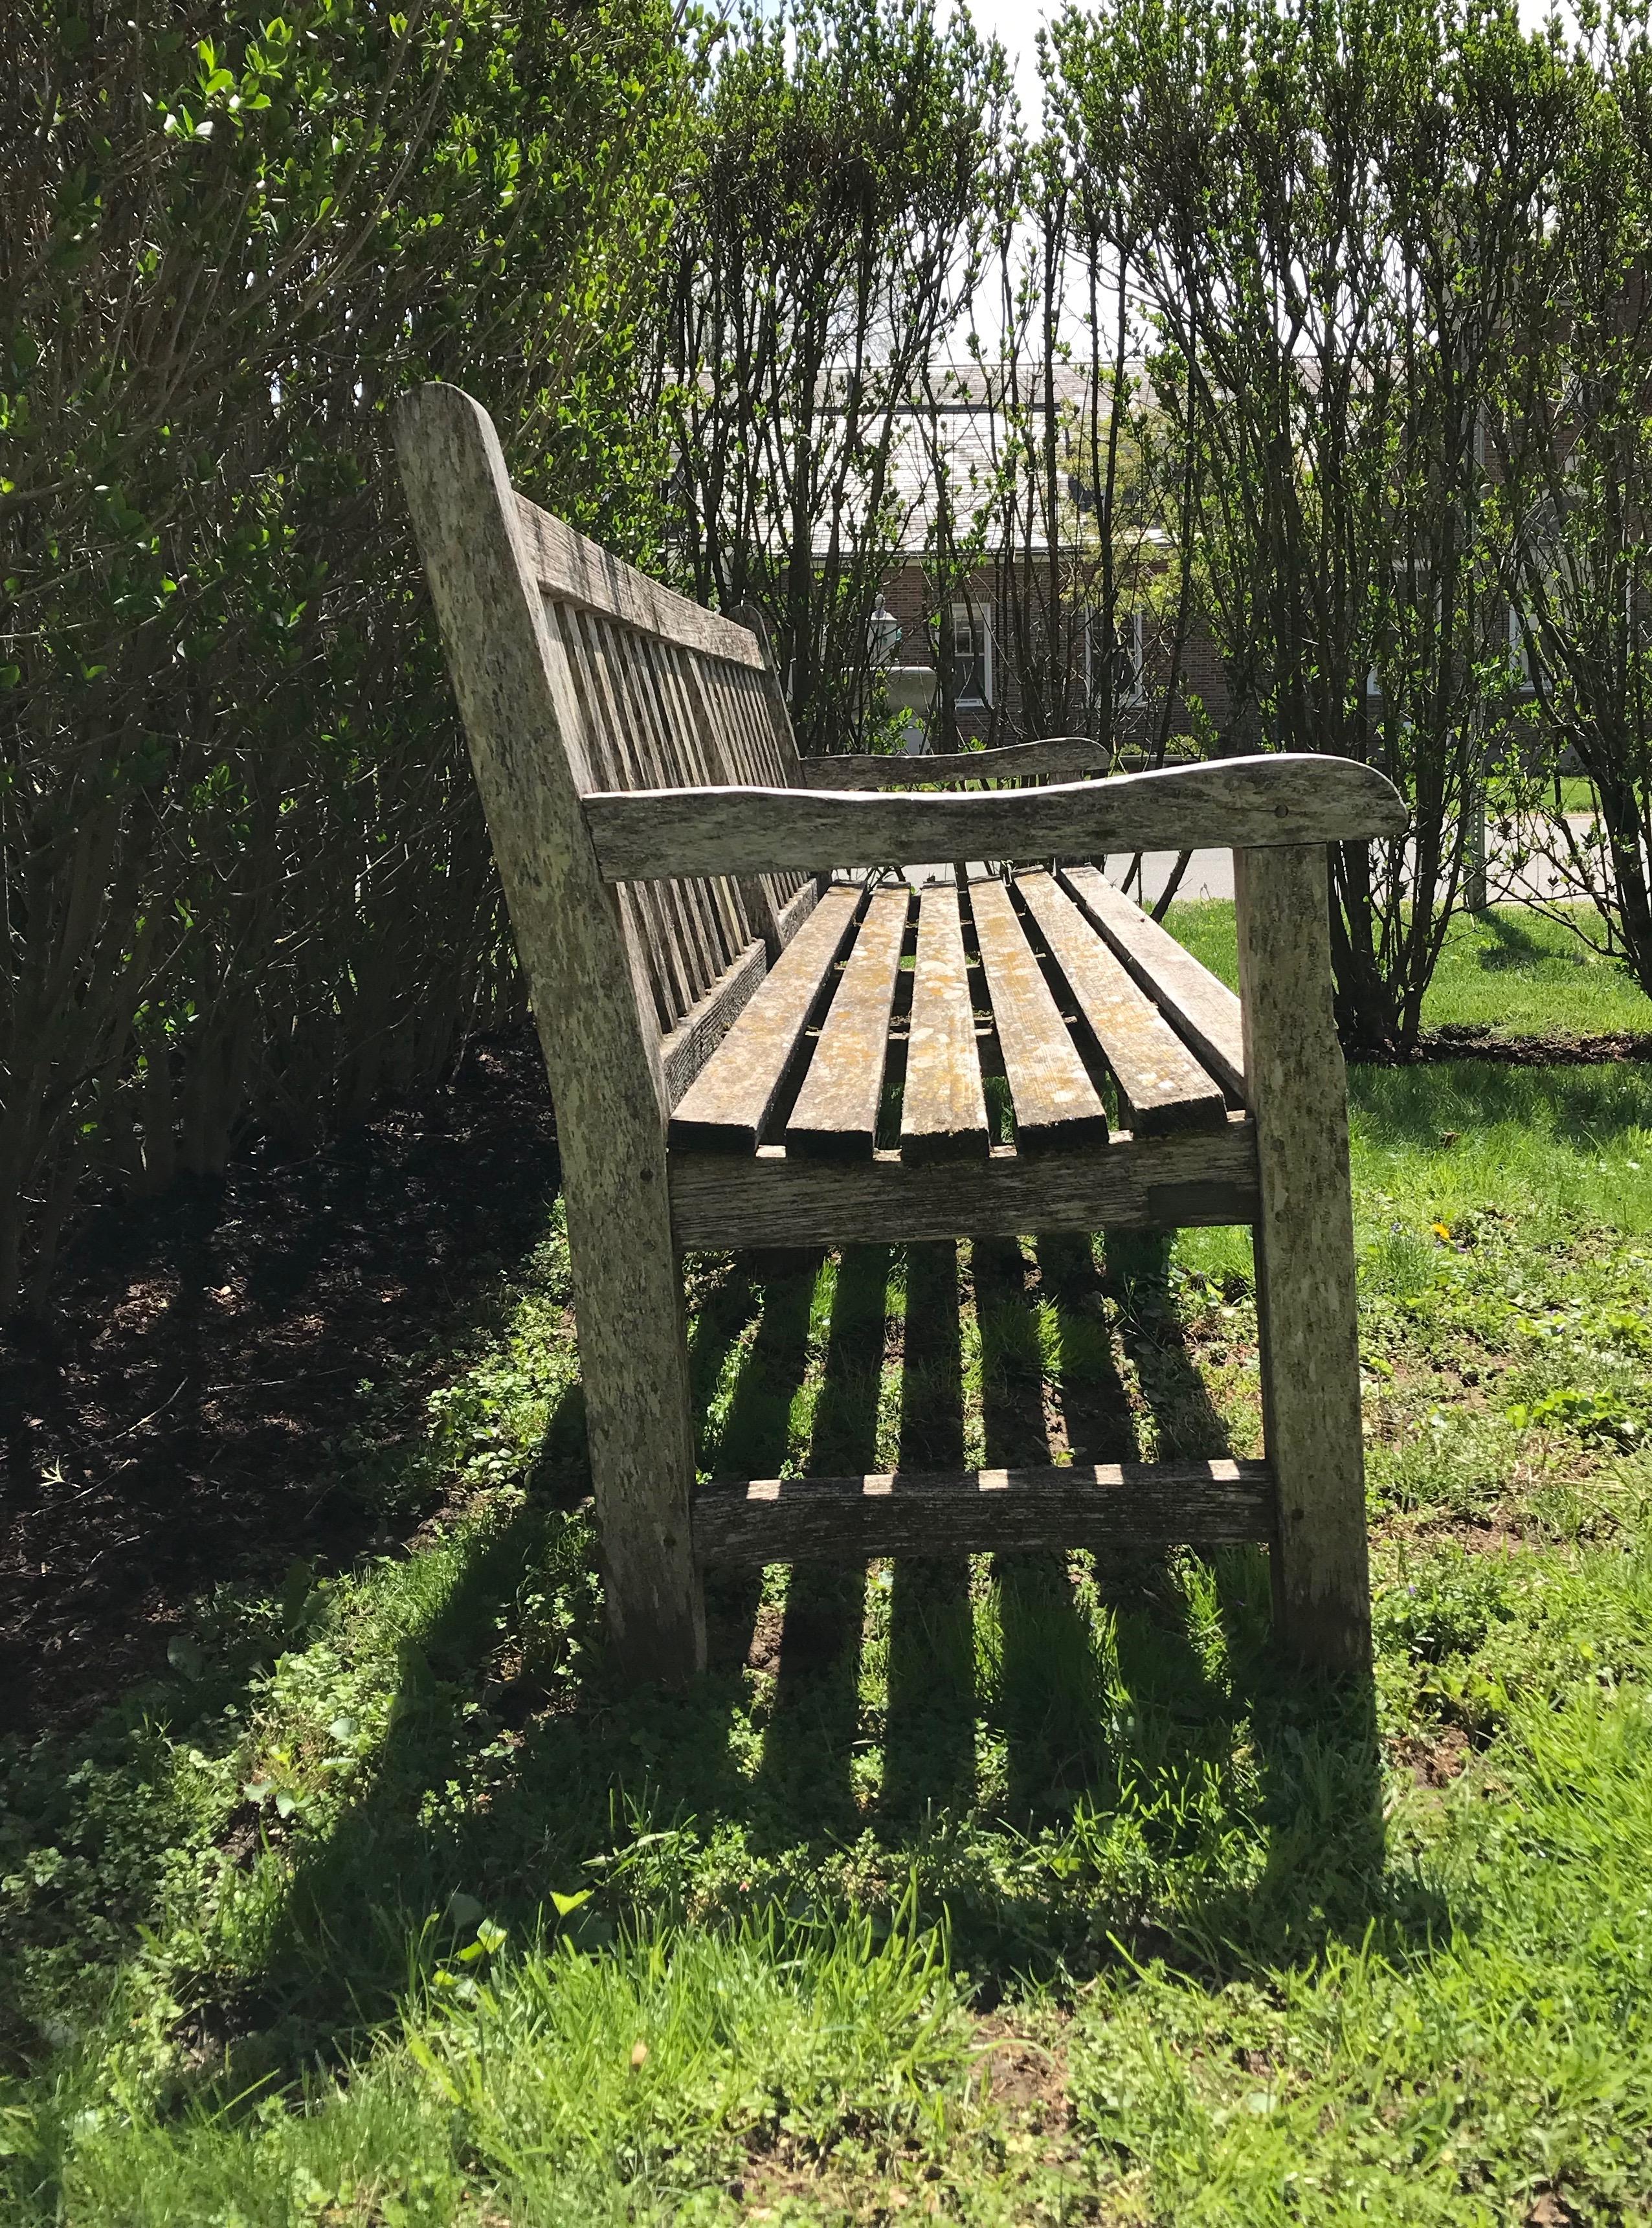 The lichened surface on this estate-sized bench is truly amazing and takes many decades to achieve this perfect patina. At almost 8 feet long, it would be wonderful in front of a long, deep border or for outdoor dining. In excellent structural